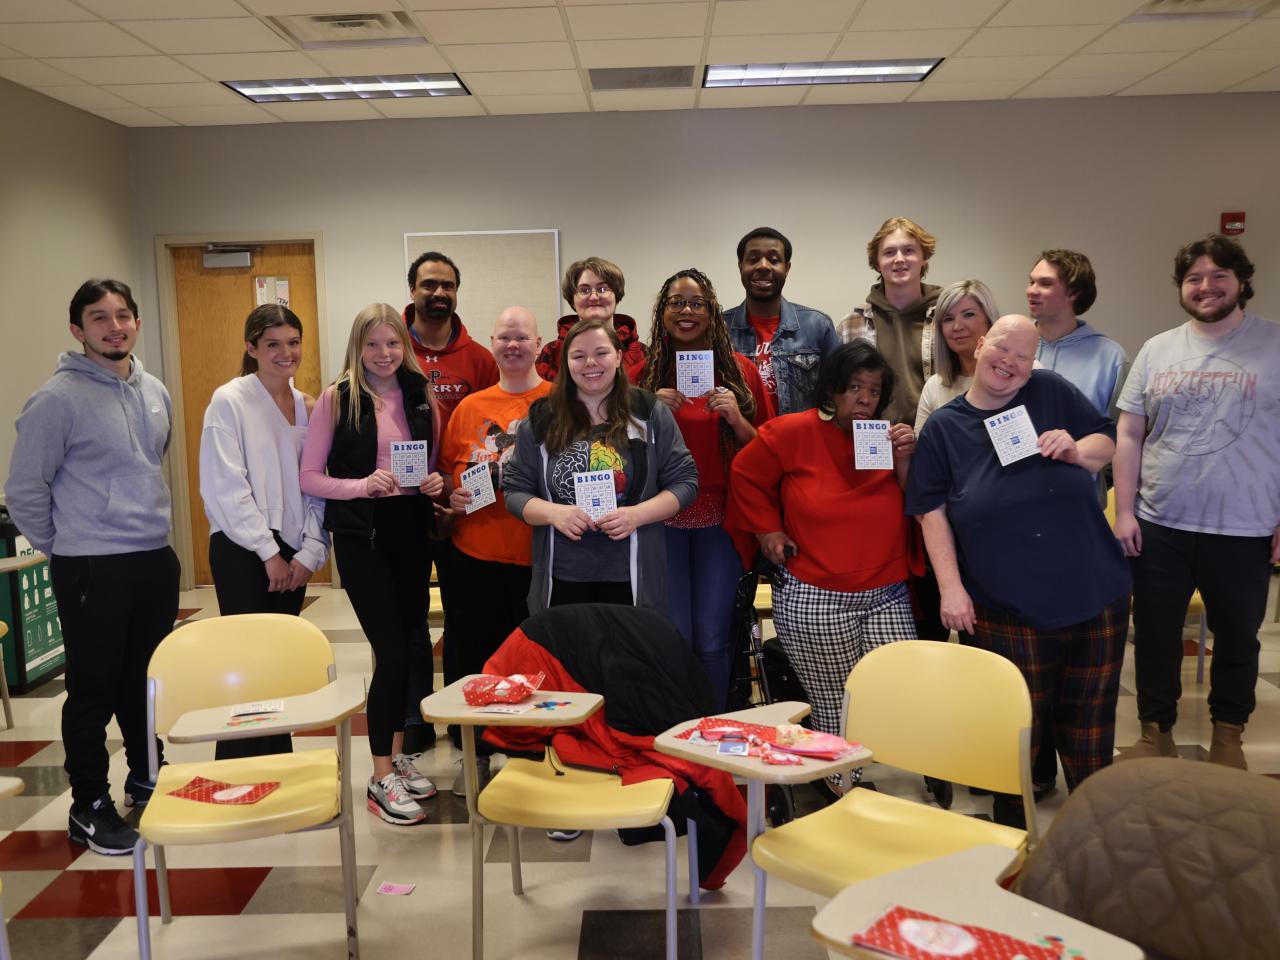 Ohio State Lima psych students host a bingo day for students from Allen County Board of Developmental Disabilities